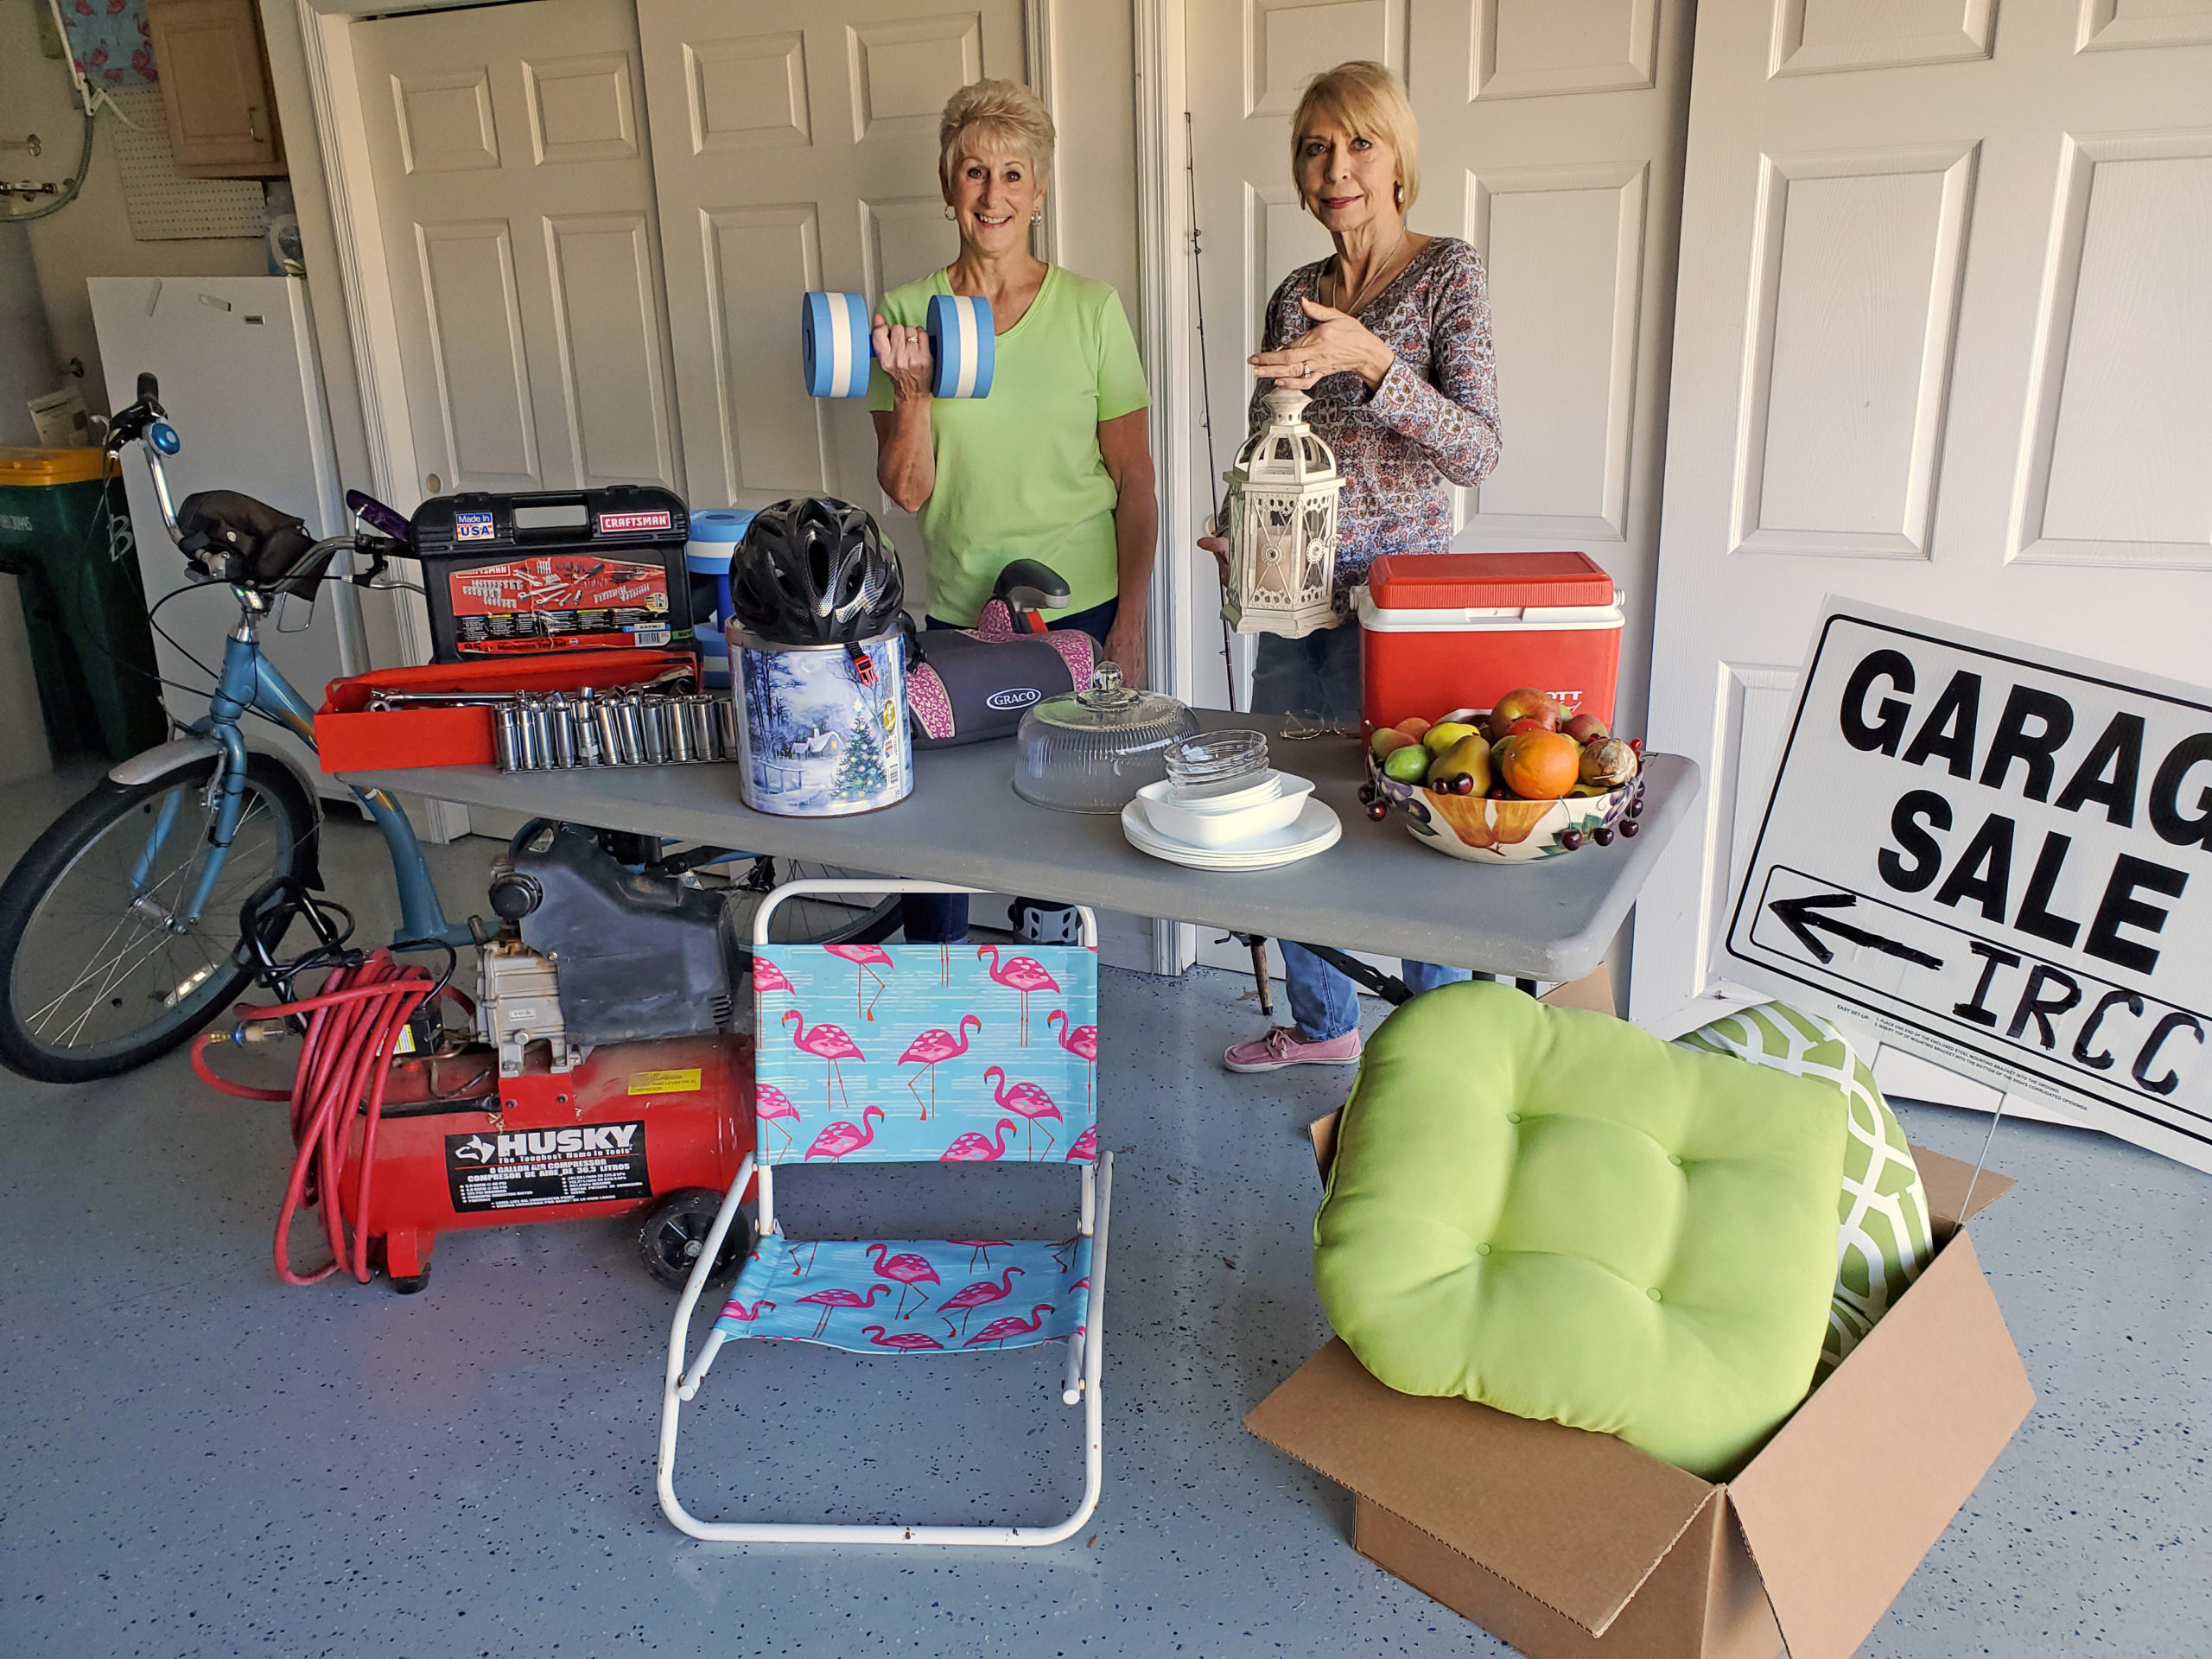 Indian River Colony Club Opens to Public for Garage Sale